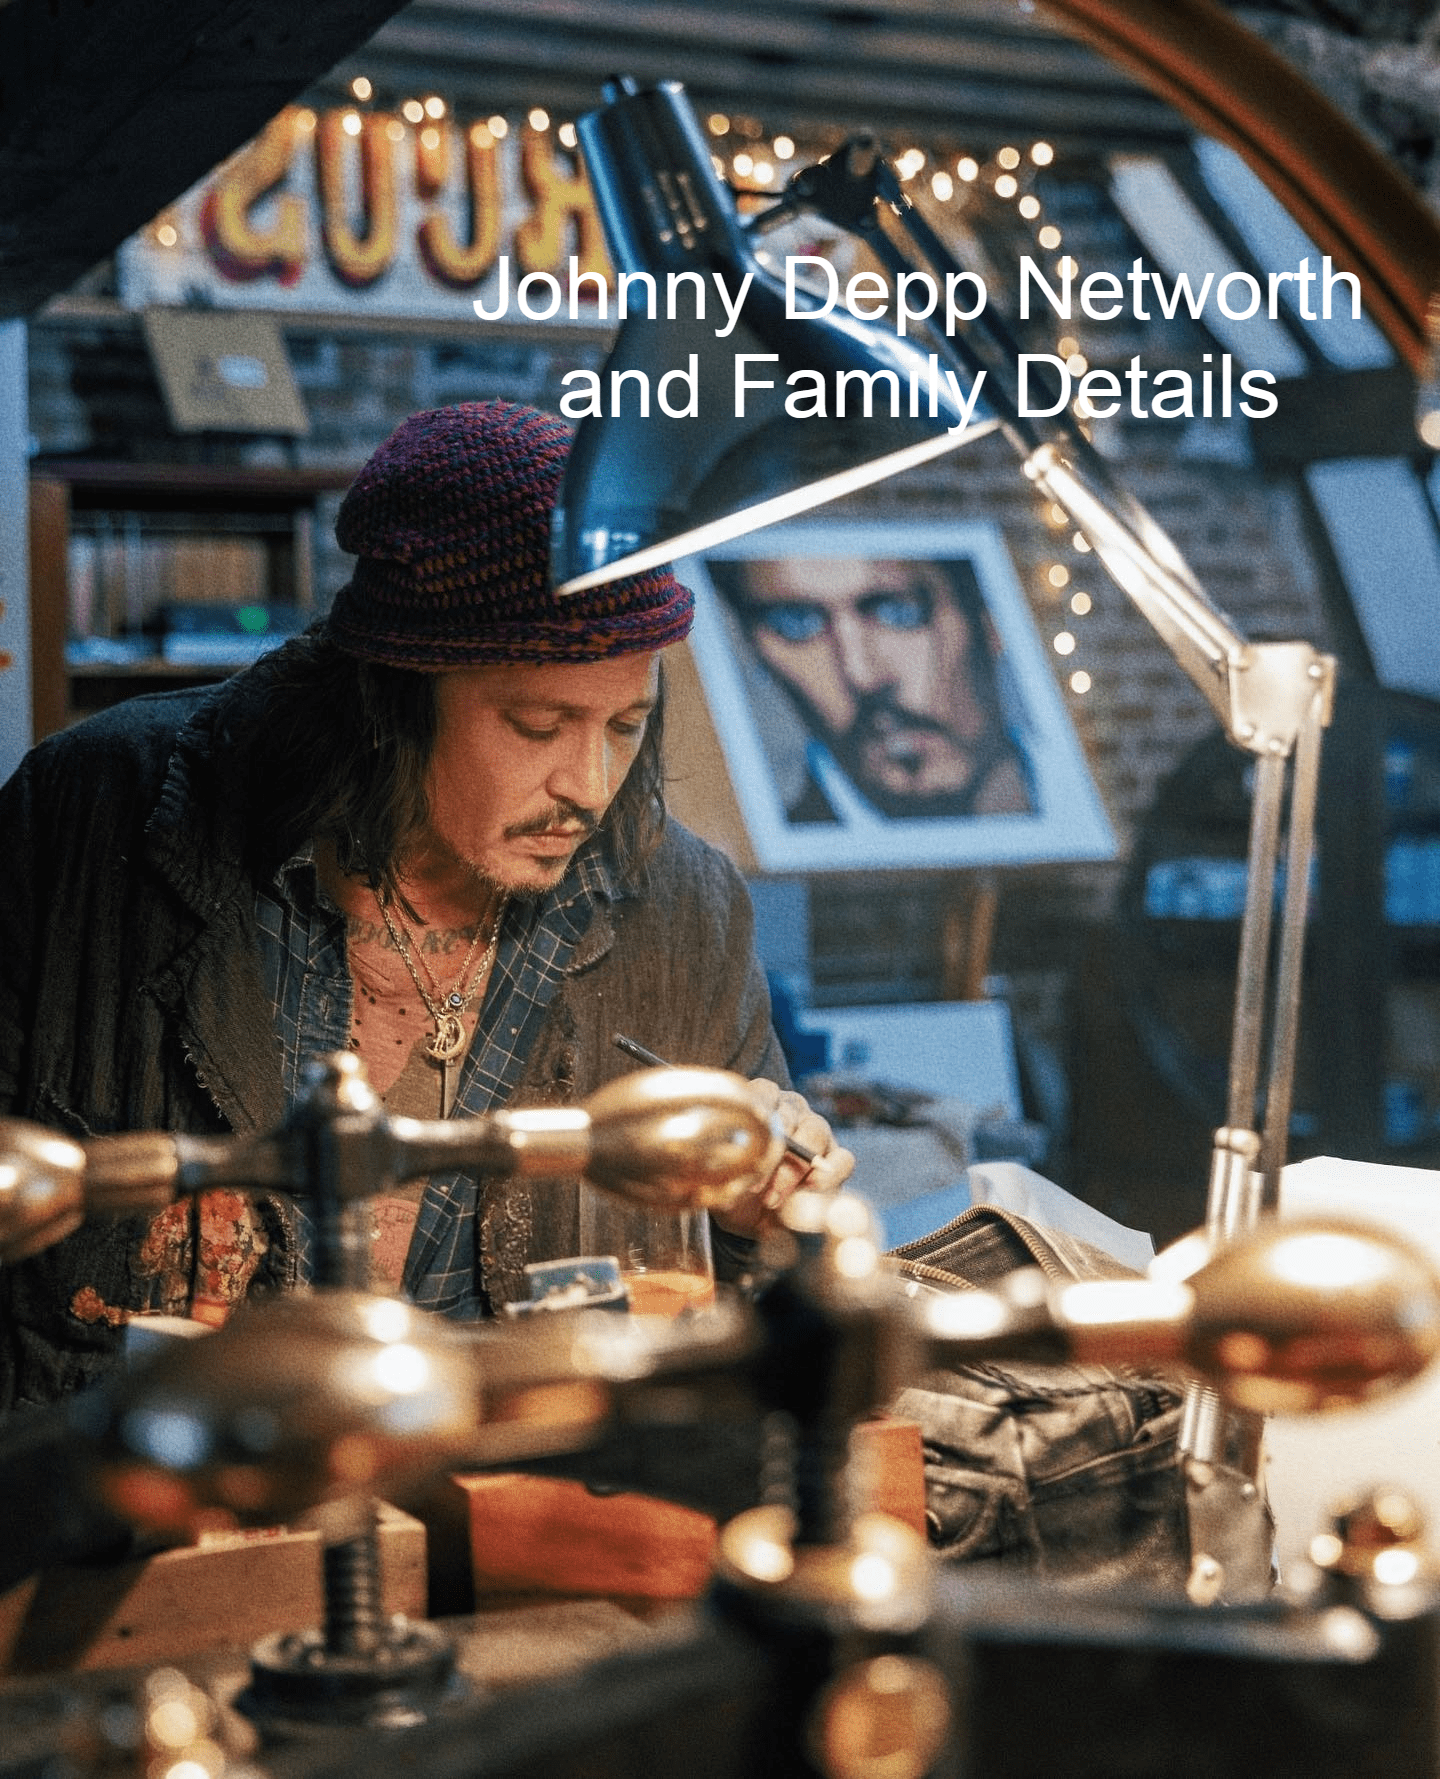 Johnny Depp Networth and Family Details